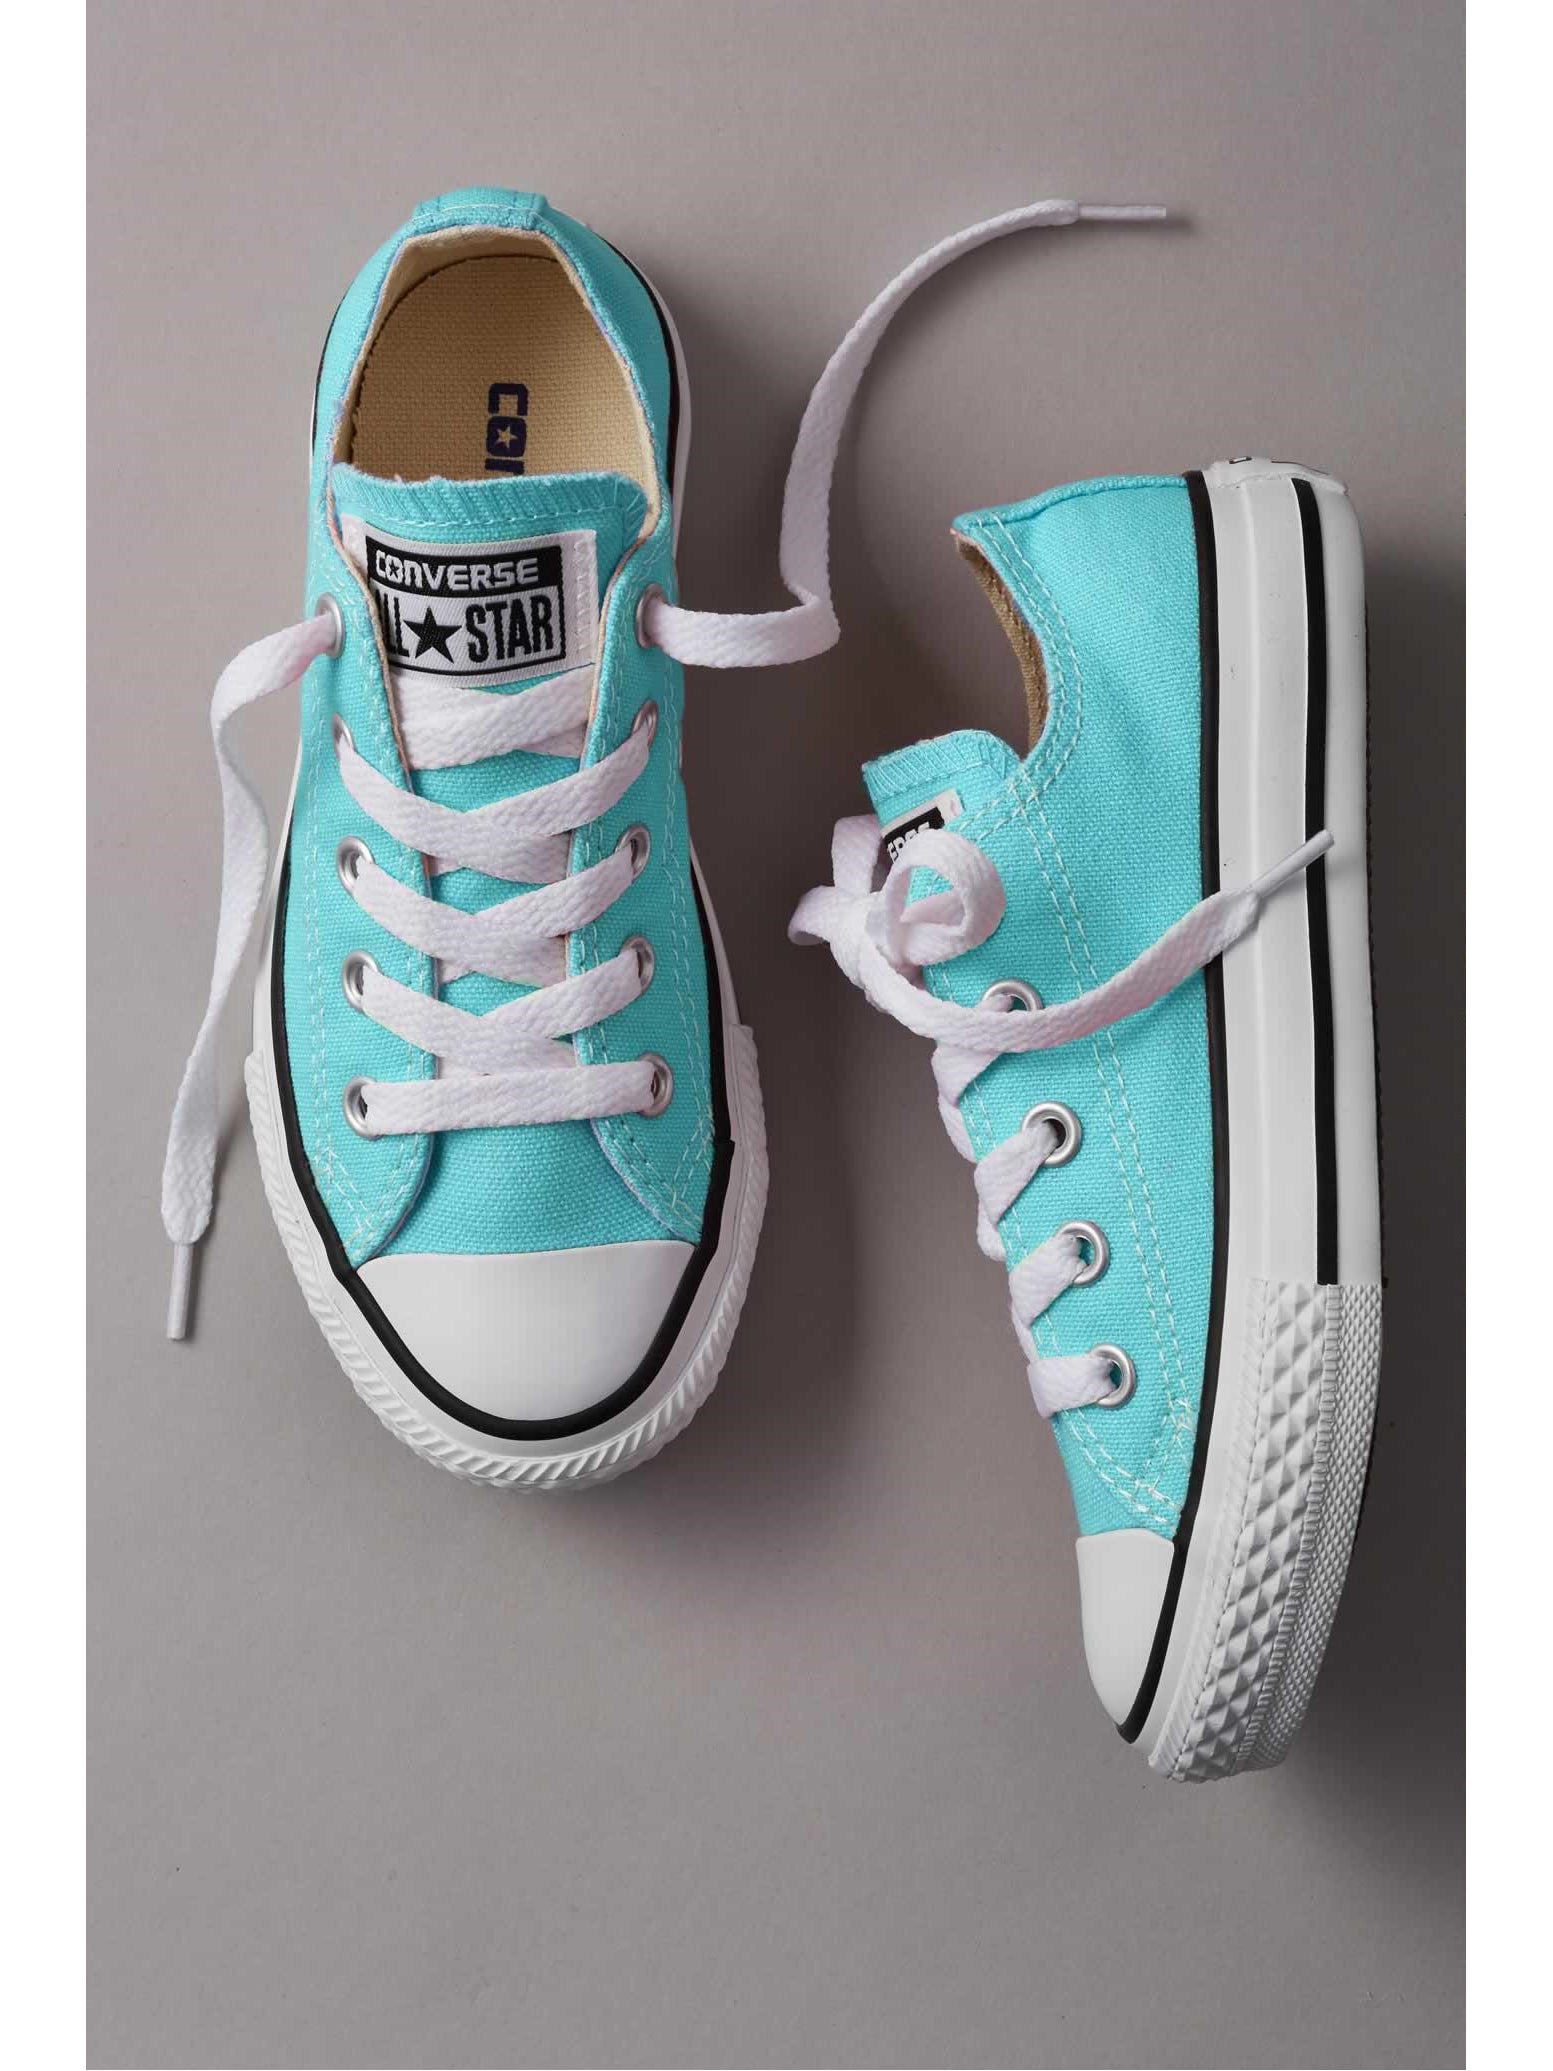 converse turquoise low tops